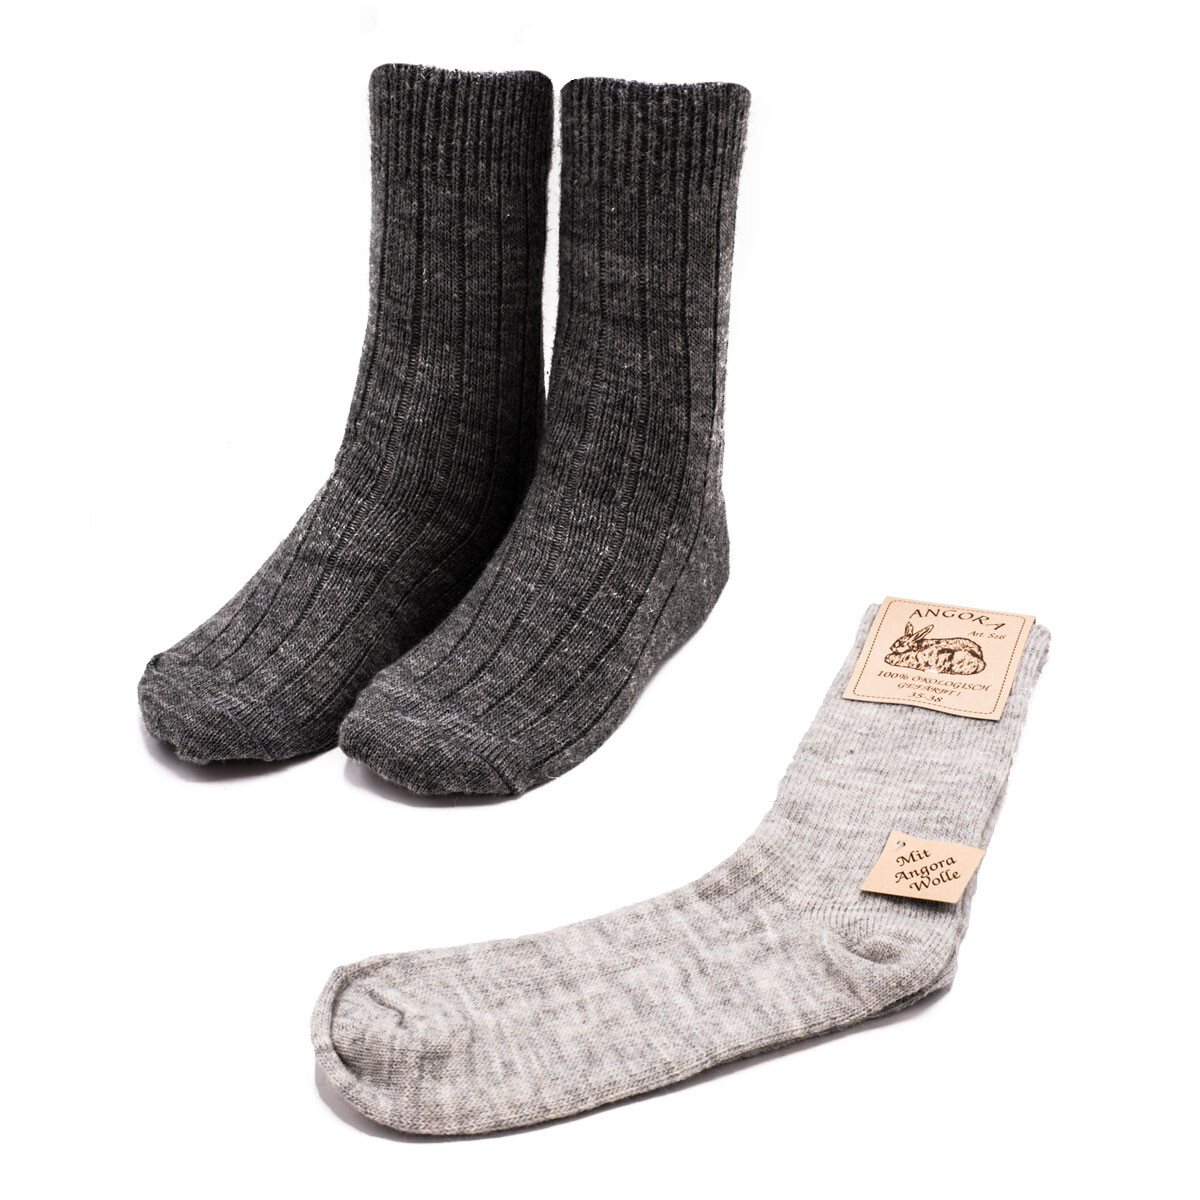 2 pairs fine knitted wool socks grey colour tones 35-38, 12,95